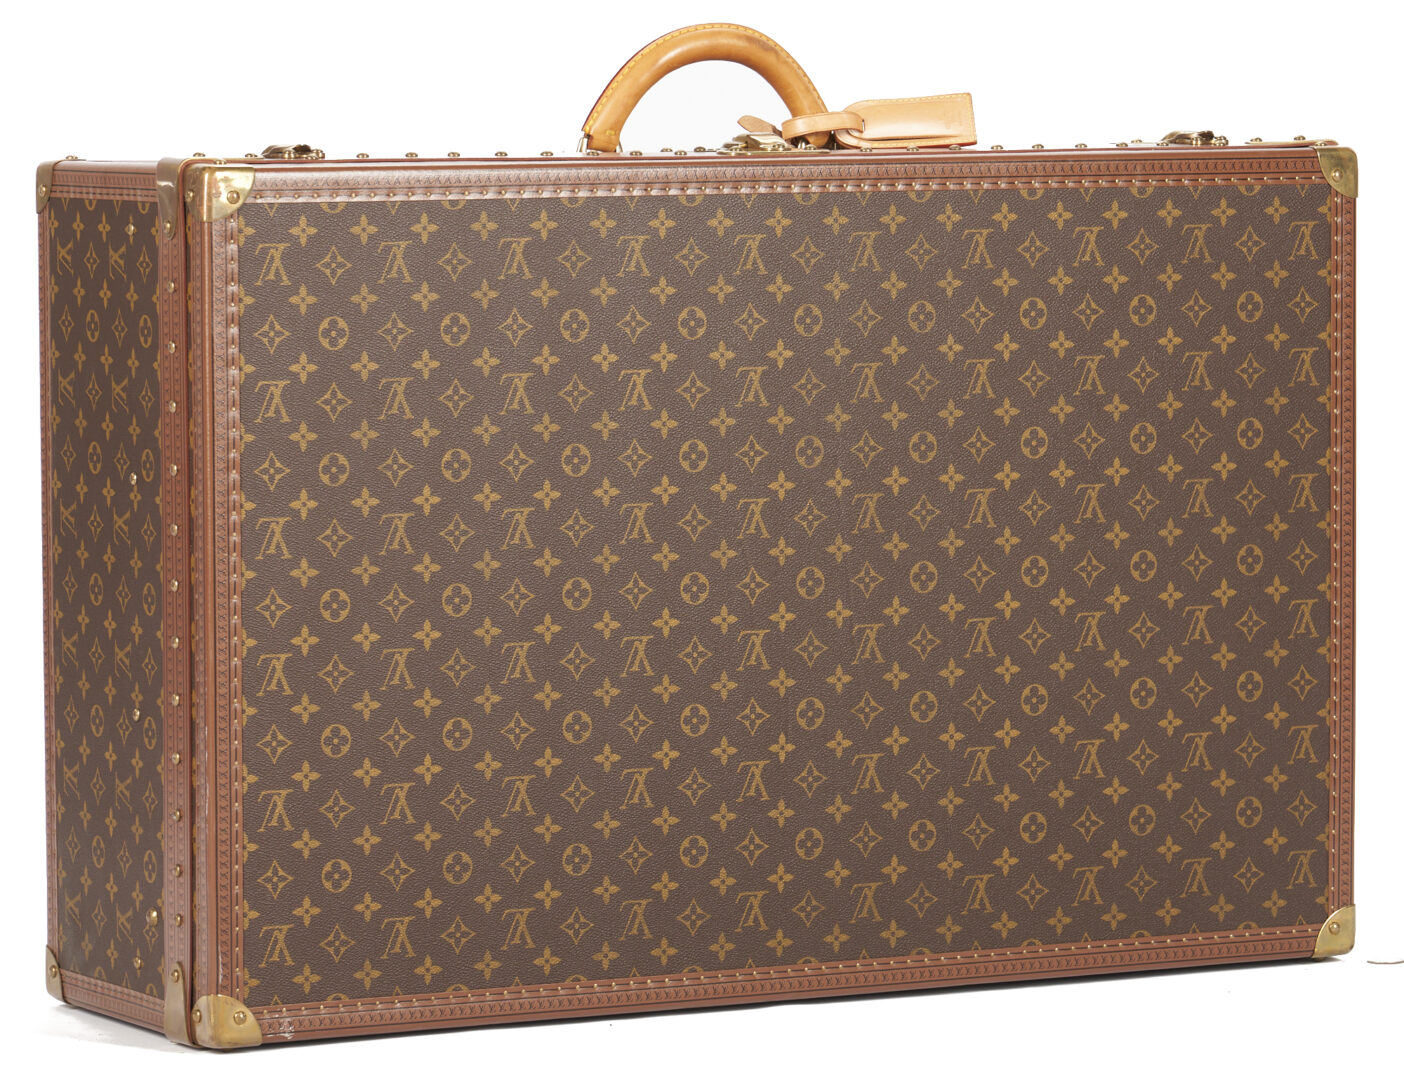 Lot 767: Louis Vuitton Hard Sided Suitcase, Alzer 80